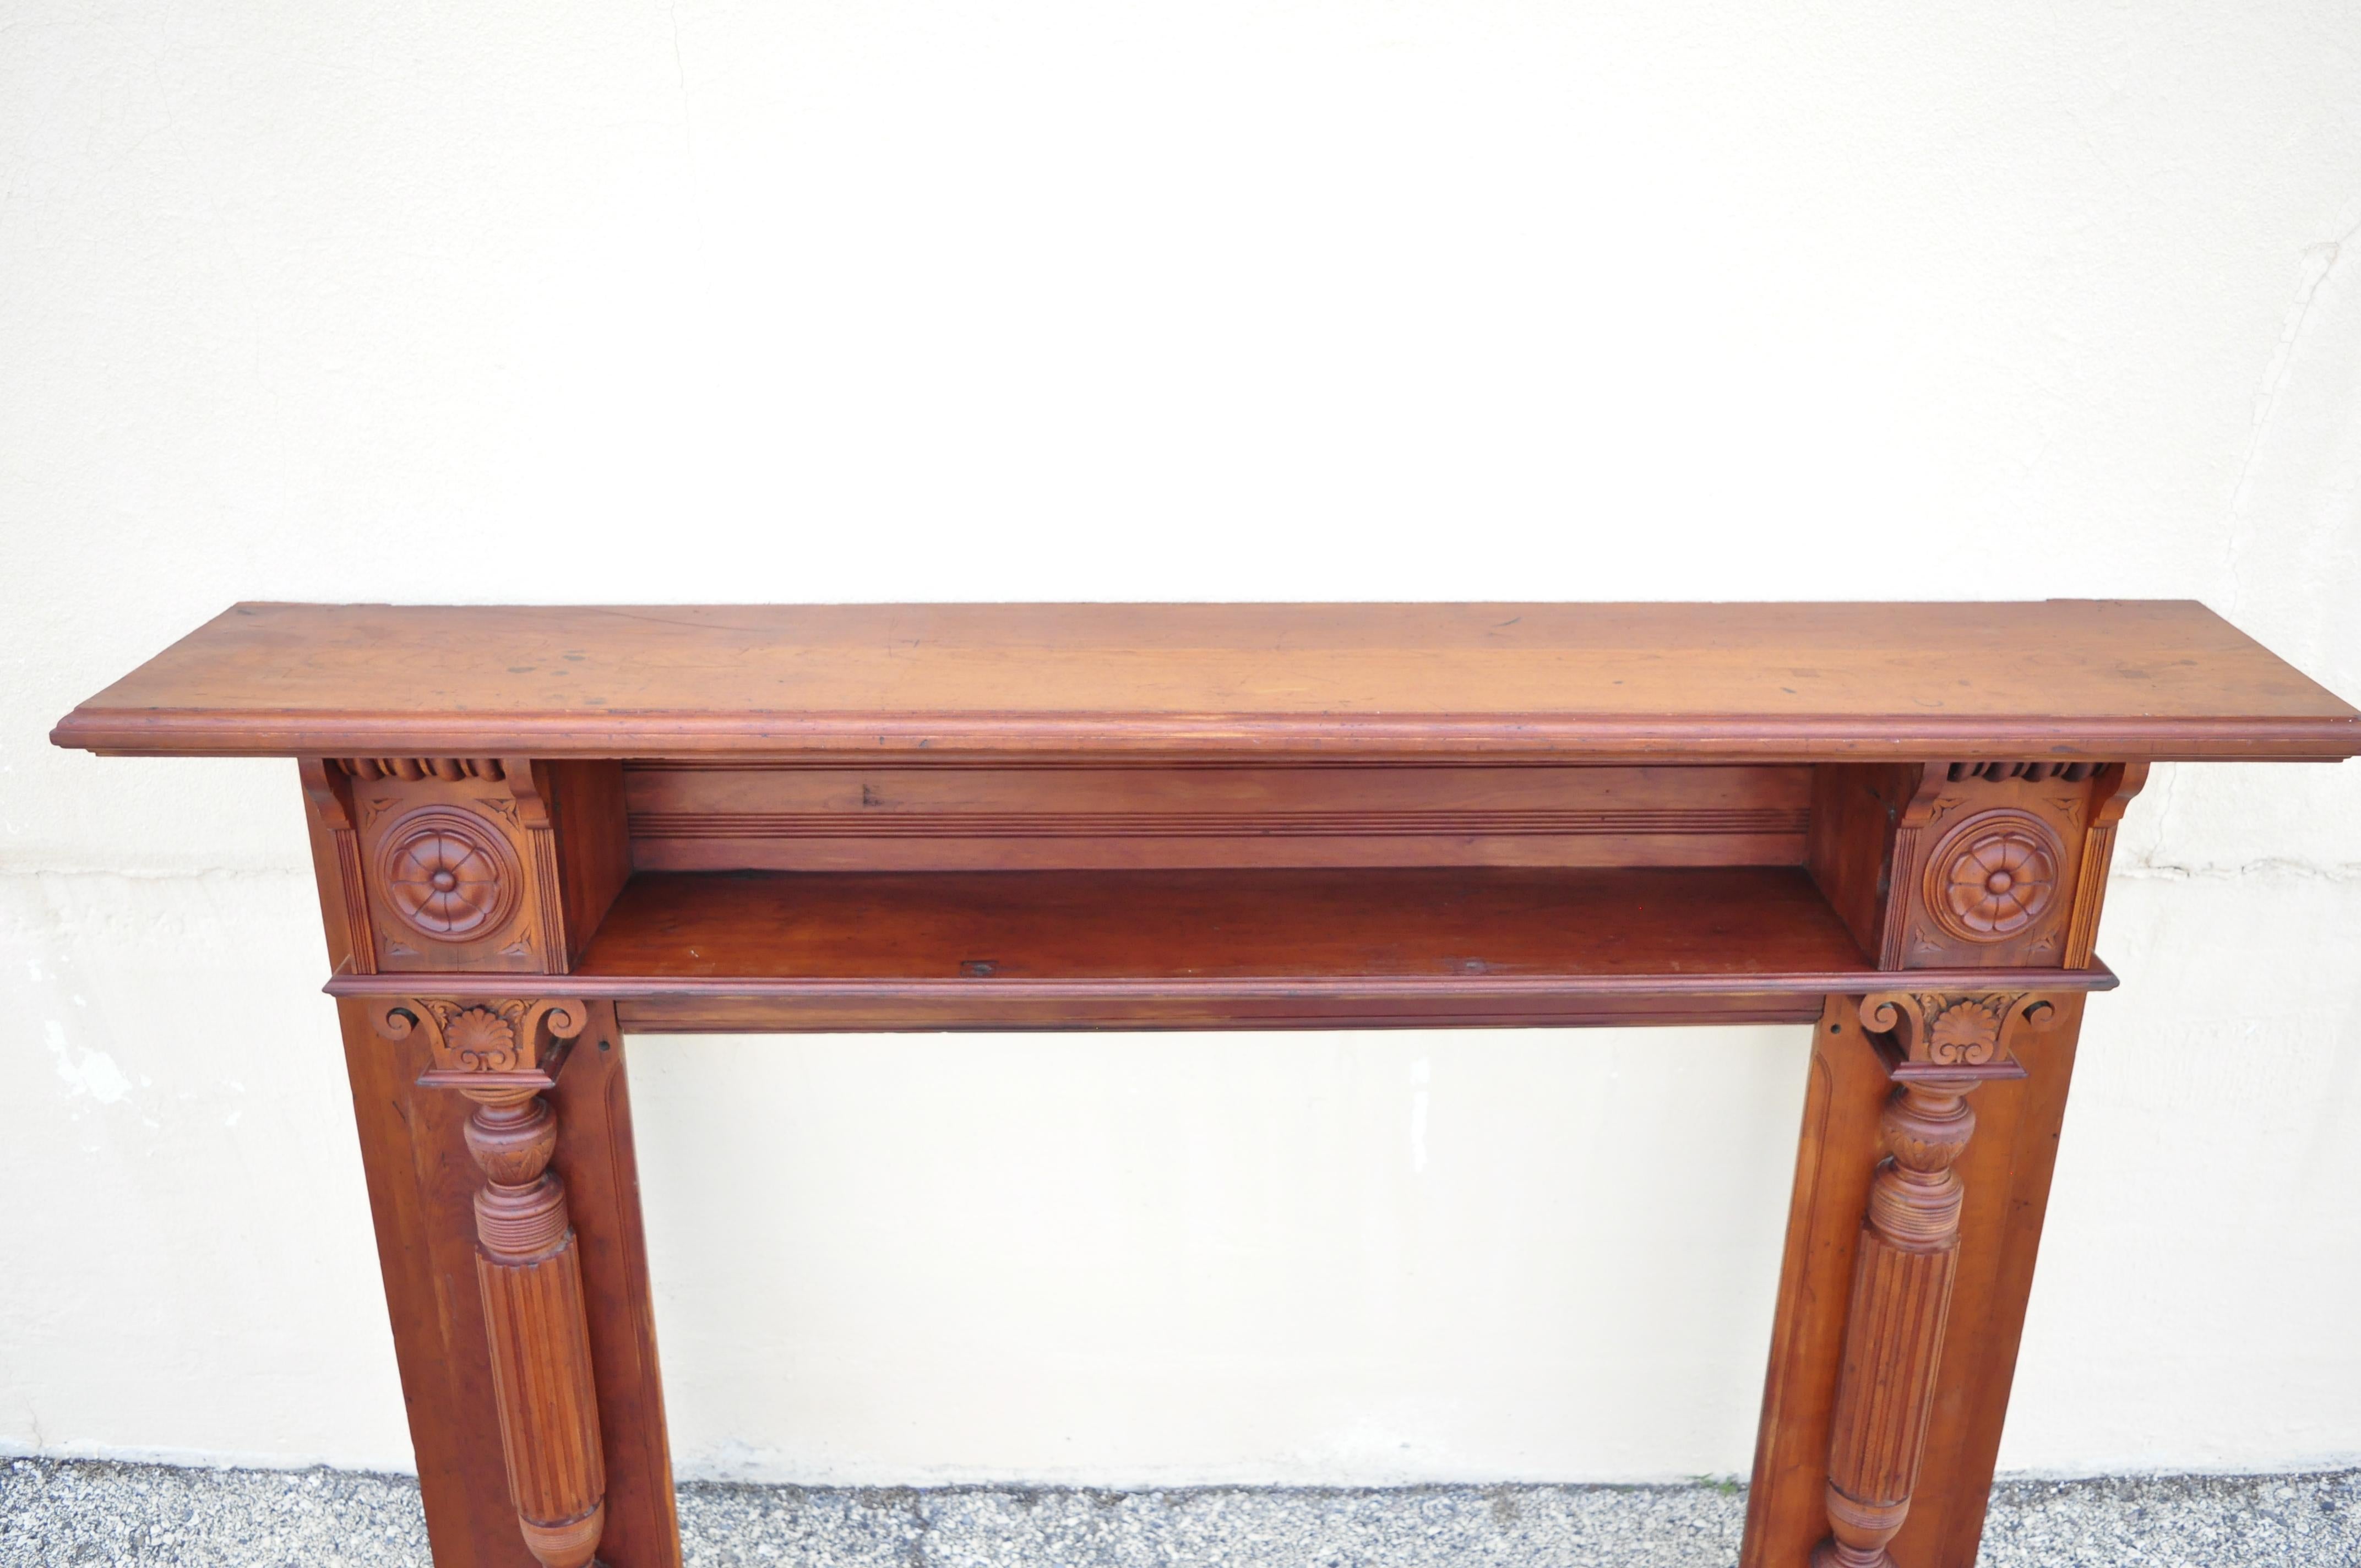 Antique American Victorian Cherry Wood Carved Column Fireplace Mantel Shelf 3